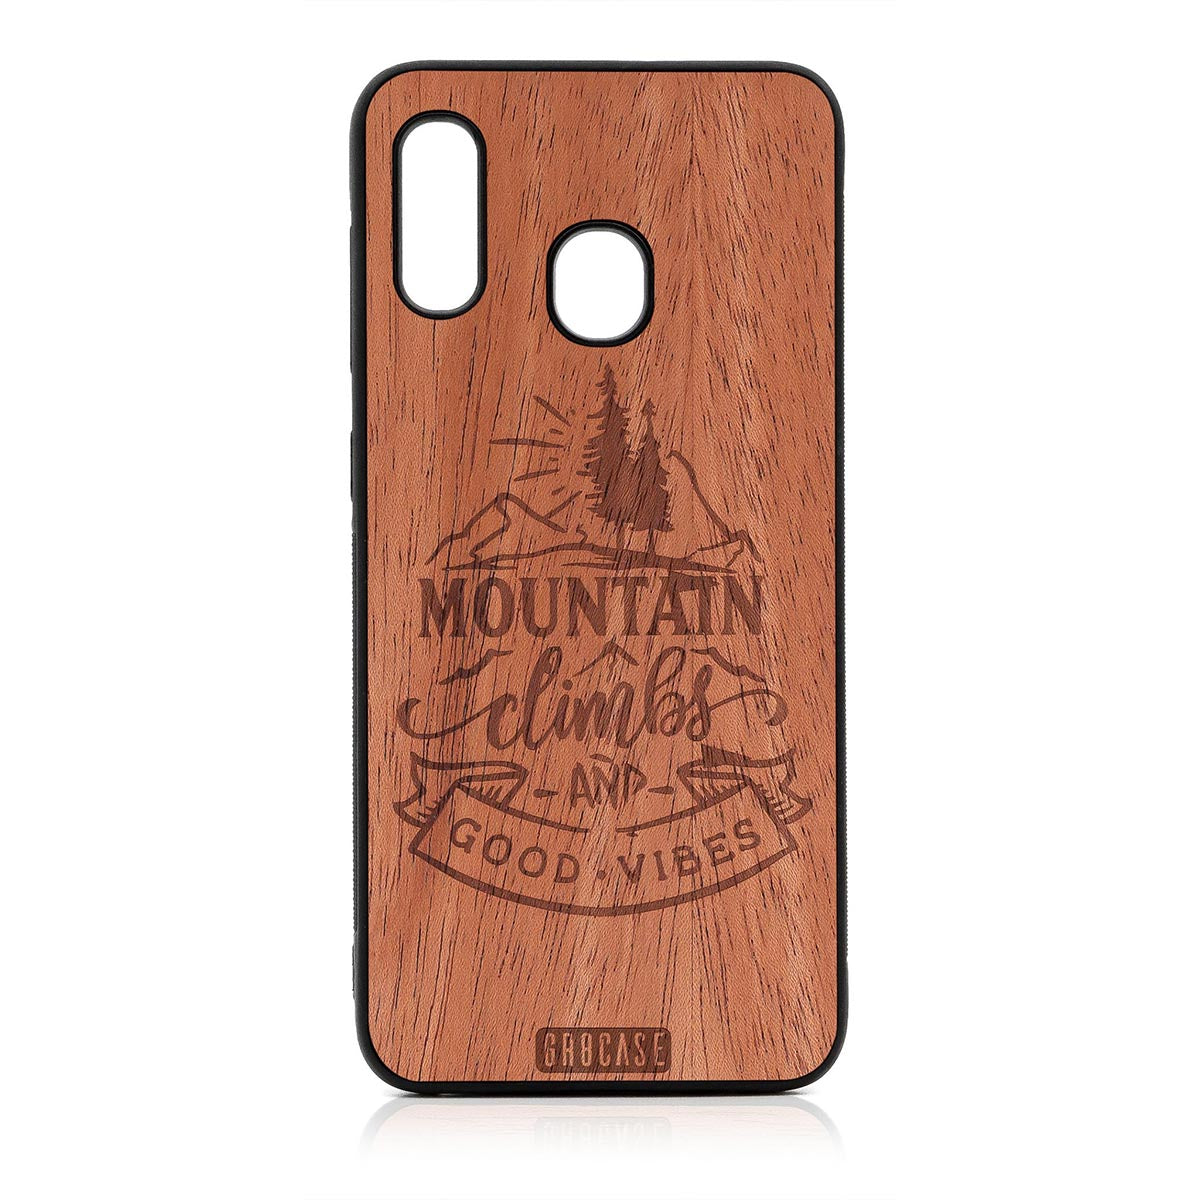 Mountain Climbs And Good Vibes Design Wood Case For Samsung Galaxy A20 by GR8CASE